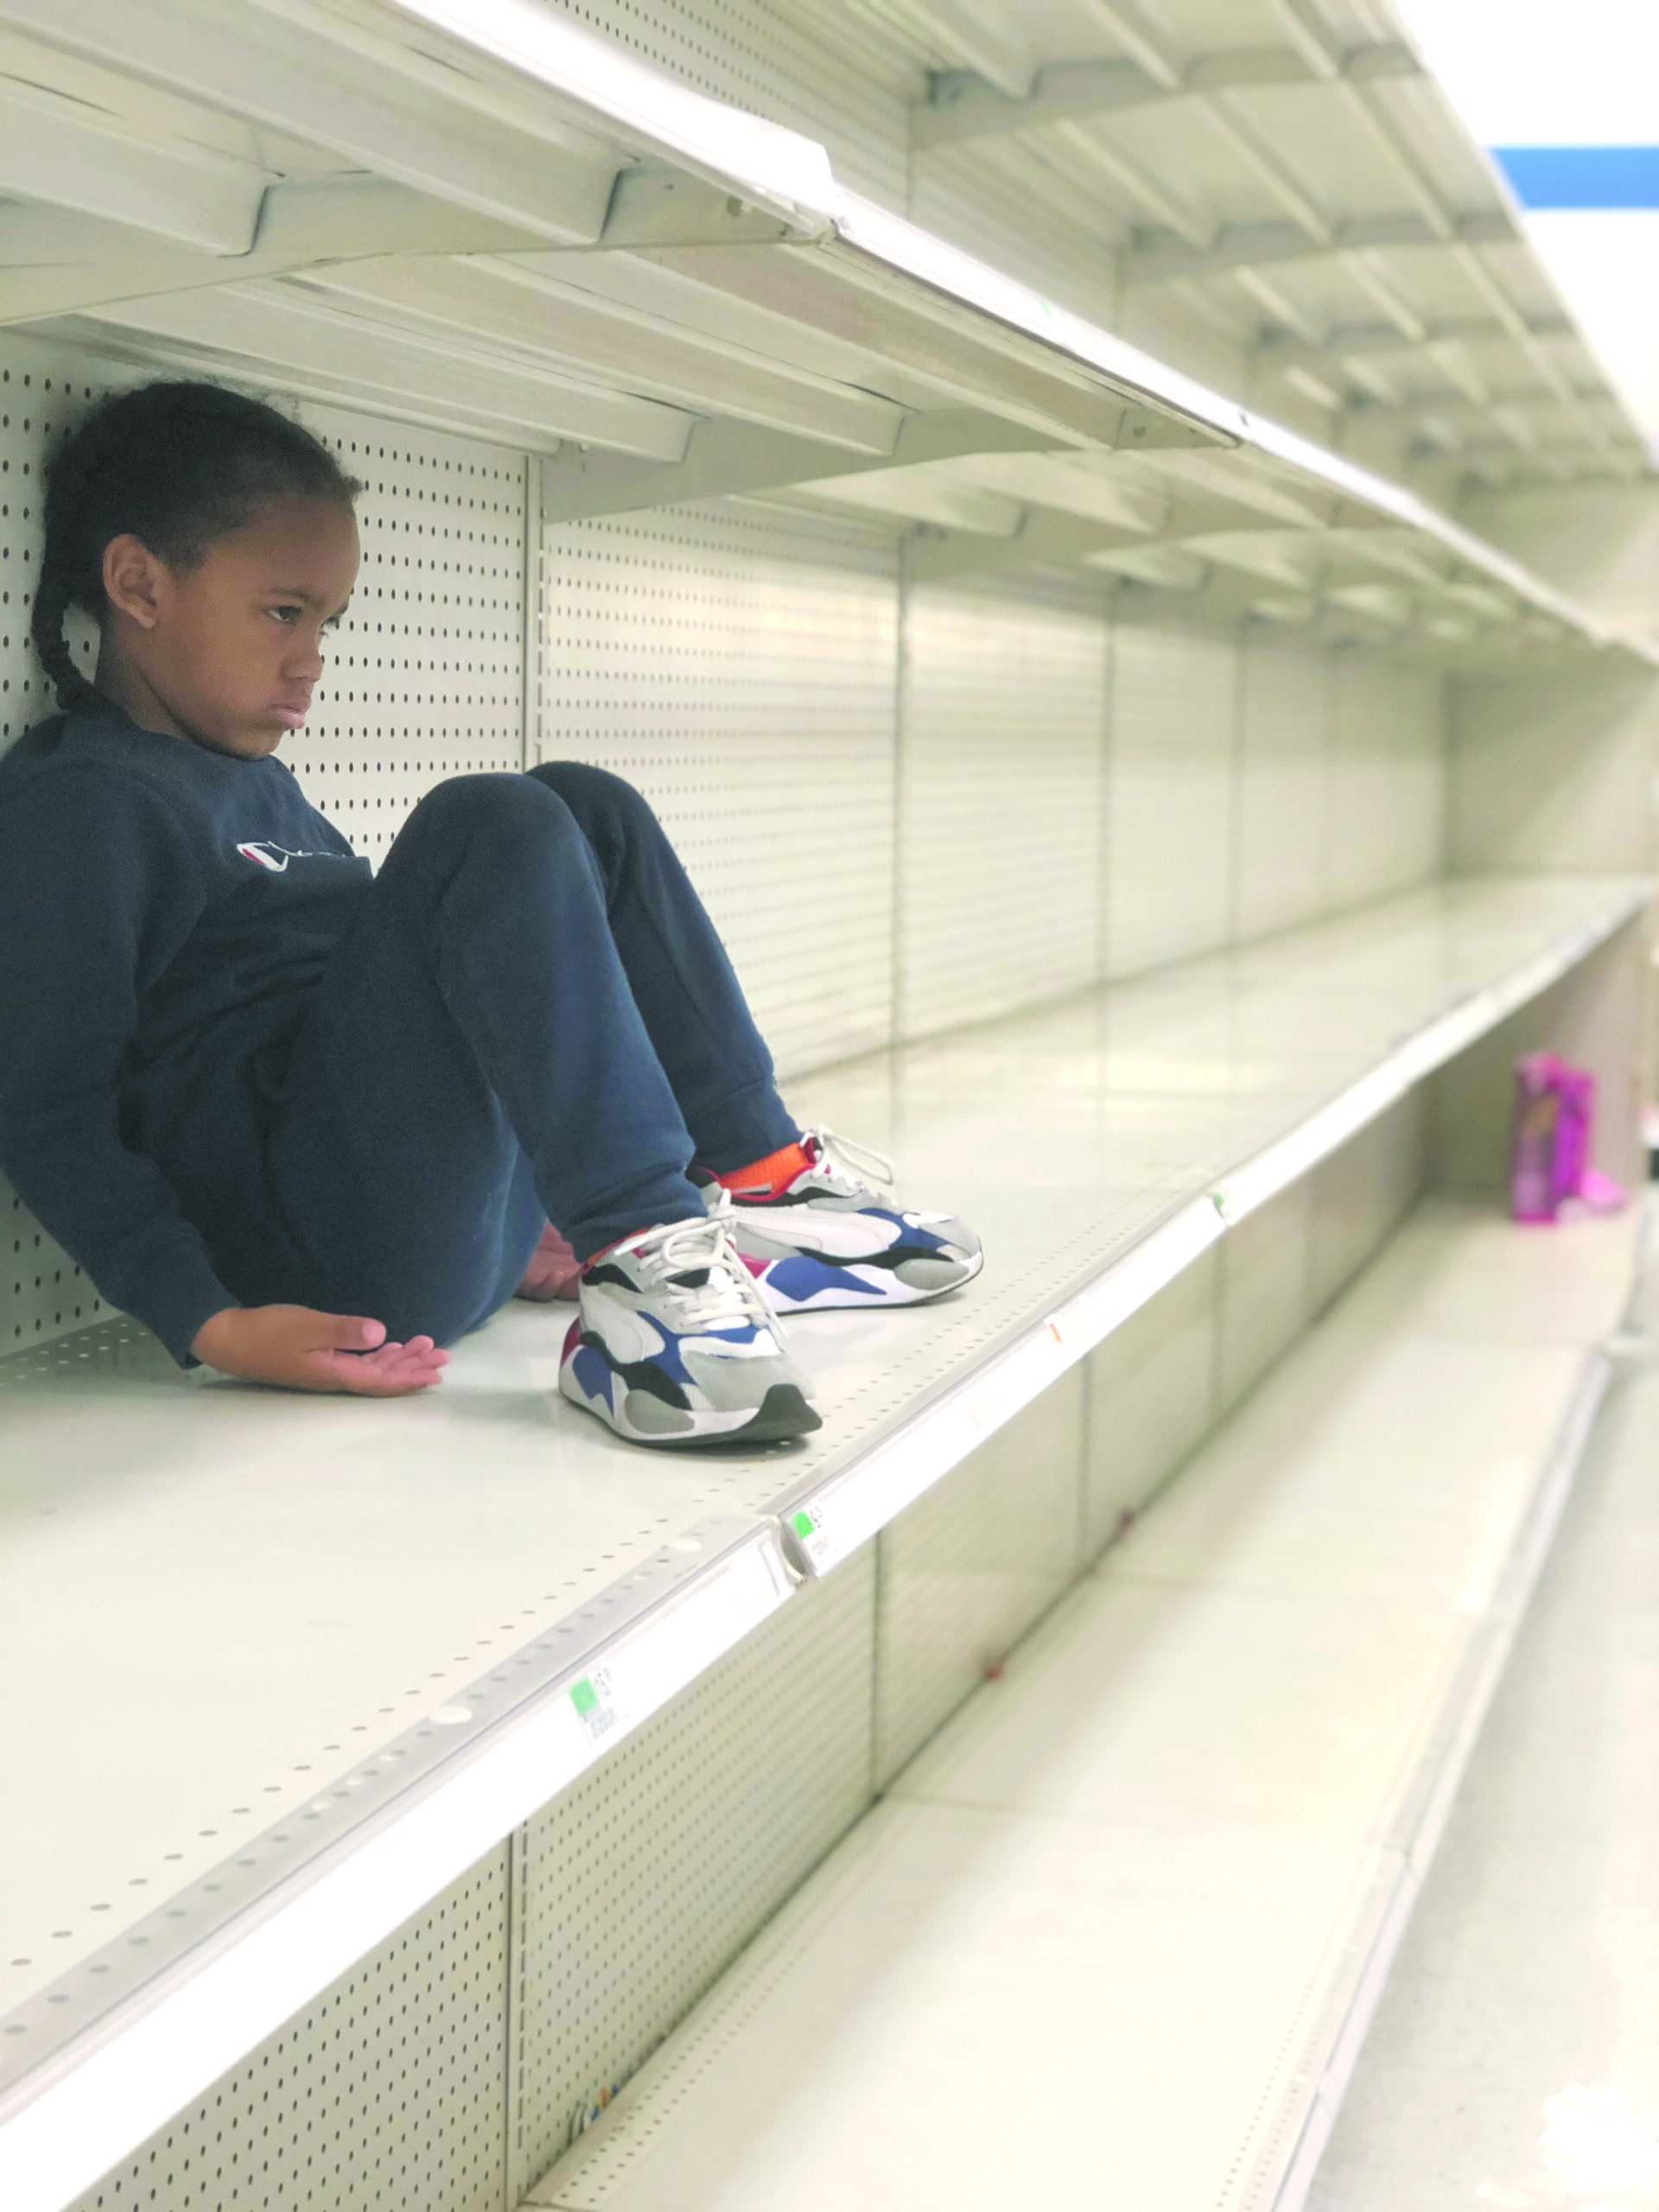 Korrina Goree of the Shinnecock Territory took this photo of her son Kyre Goree-Ward, 5, at the Kmart in Bridgehampton on Saturday while looking for board games and bread. They didn’t find any bread.